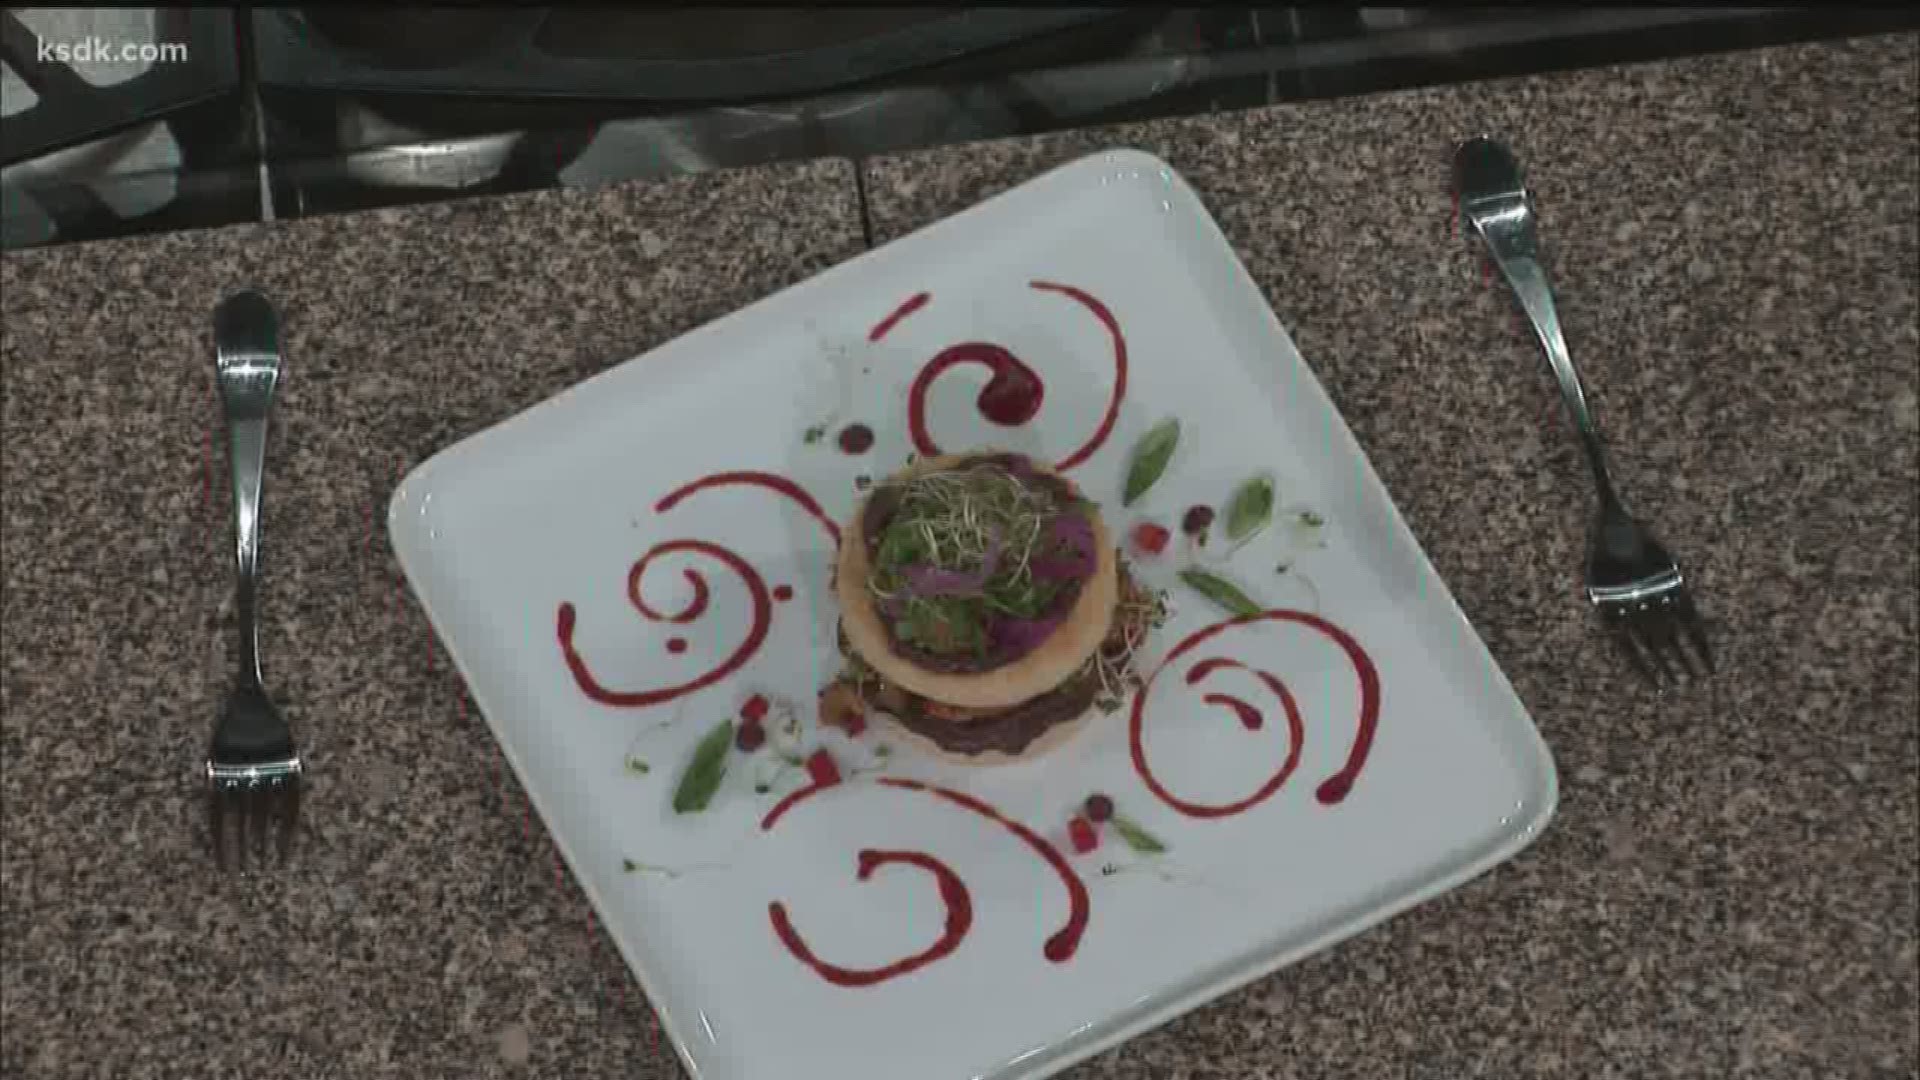 Chef Liz Schuster shared these recipes in honor of her upcoming "The Nightmare Before Christmas" event at the Mahler Ballroom.